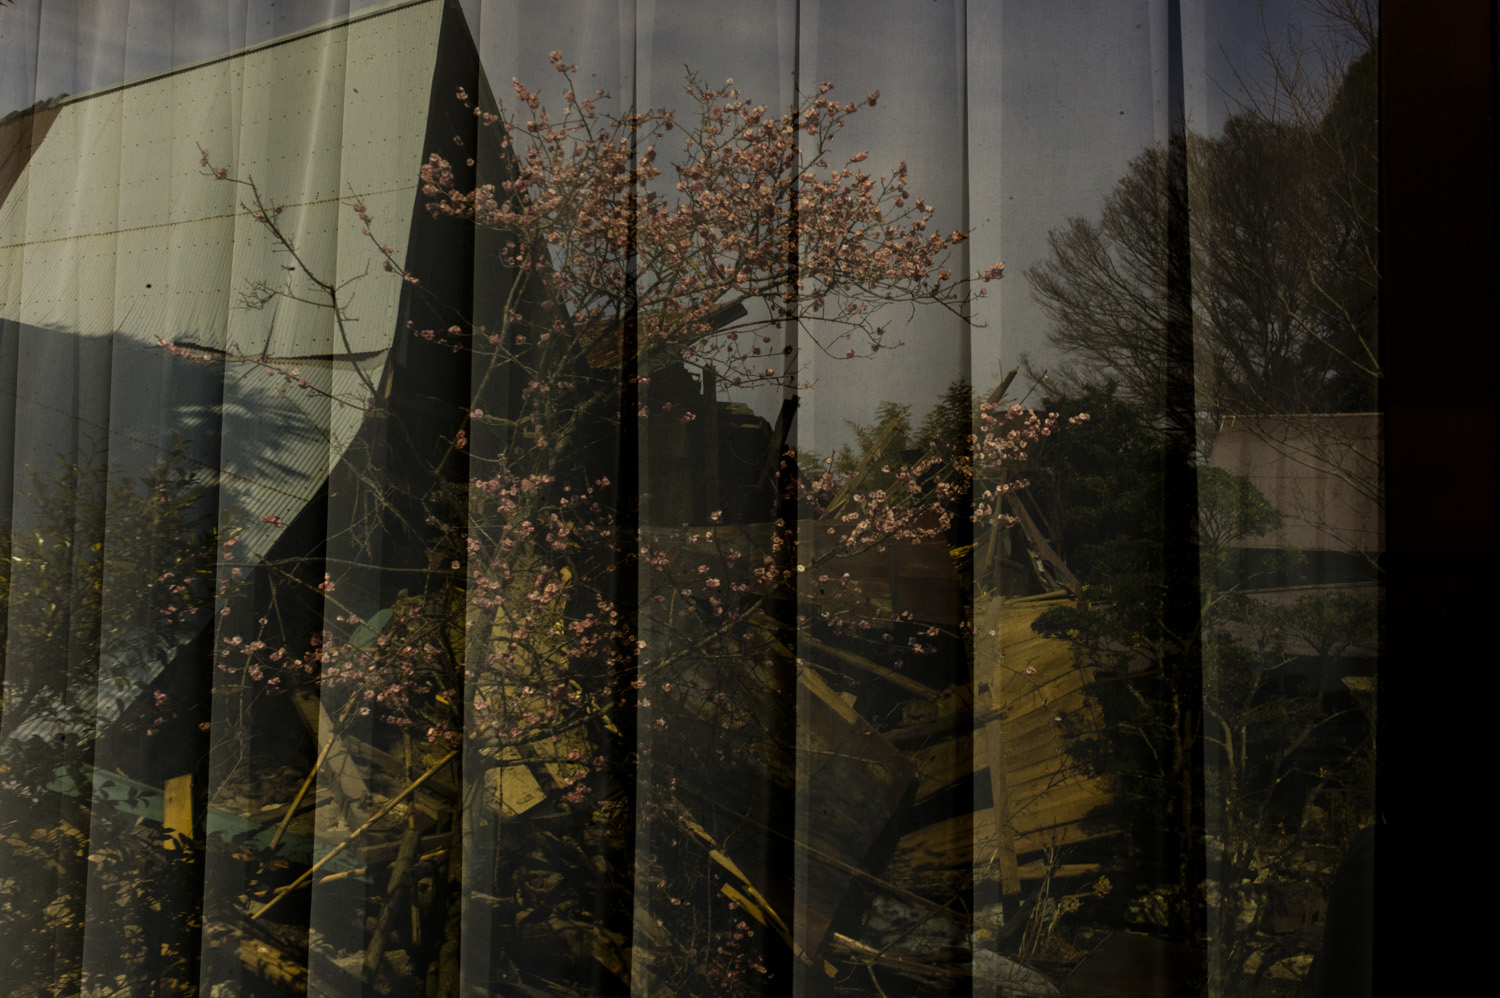 Japan, Namie, 2011. A cherry blossom tree is reflected on a window of a destroyed house inside the 20-kilometer exclusion zone around the damaged Fukushima Daiichi Nuclear Power Station. Residents had to leave in a hurry as radiation reached dangerously high levels following the meltdown and explosion at the plant.